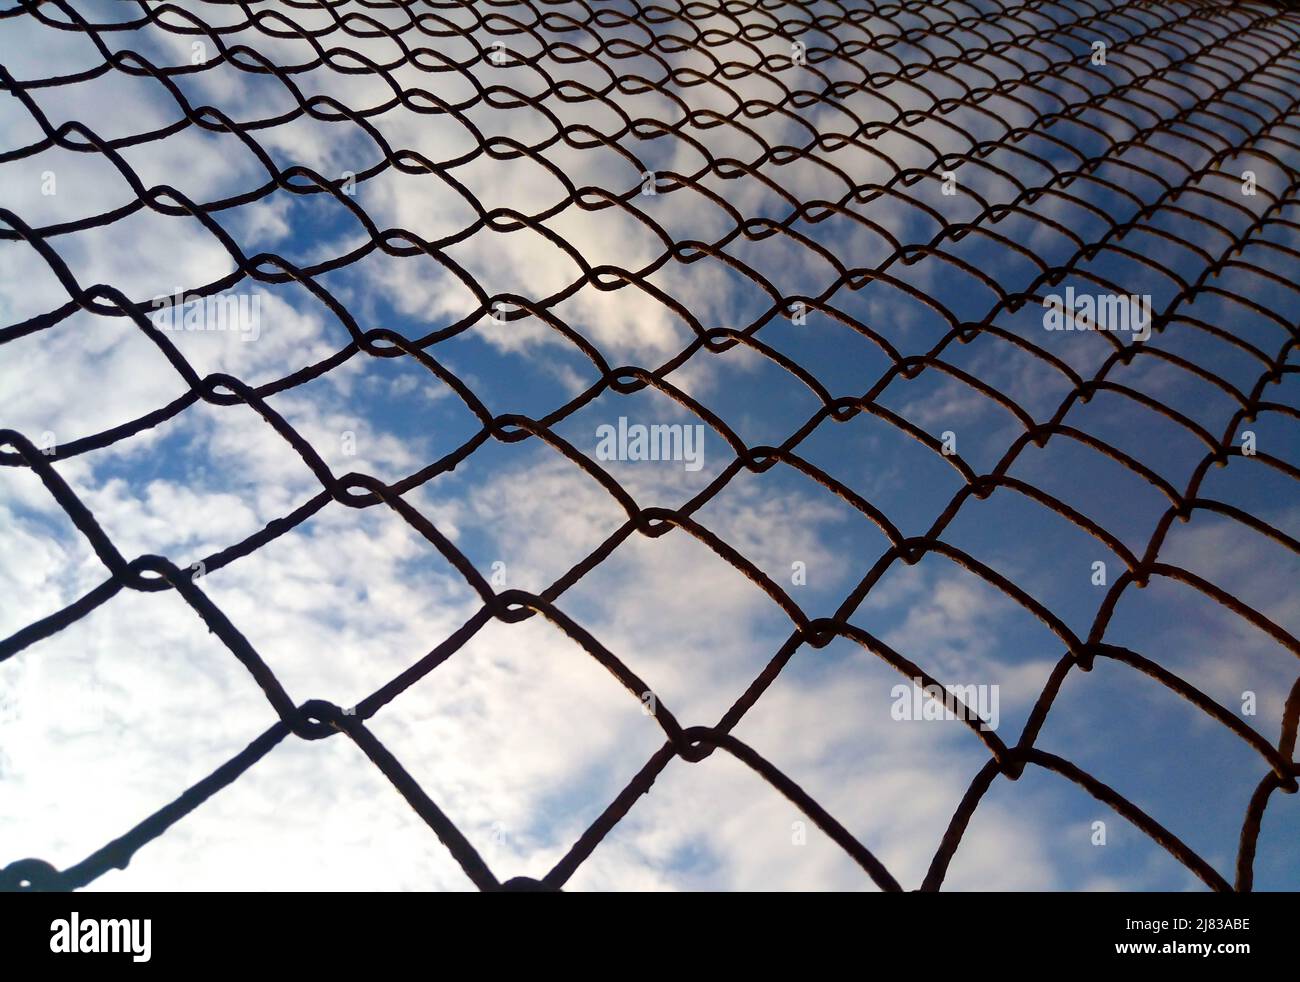 Bright blue sky with white clouds through a metal grid chain fence. Mesh background. Stock Photo